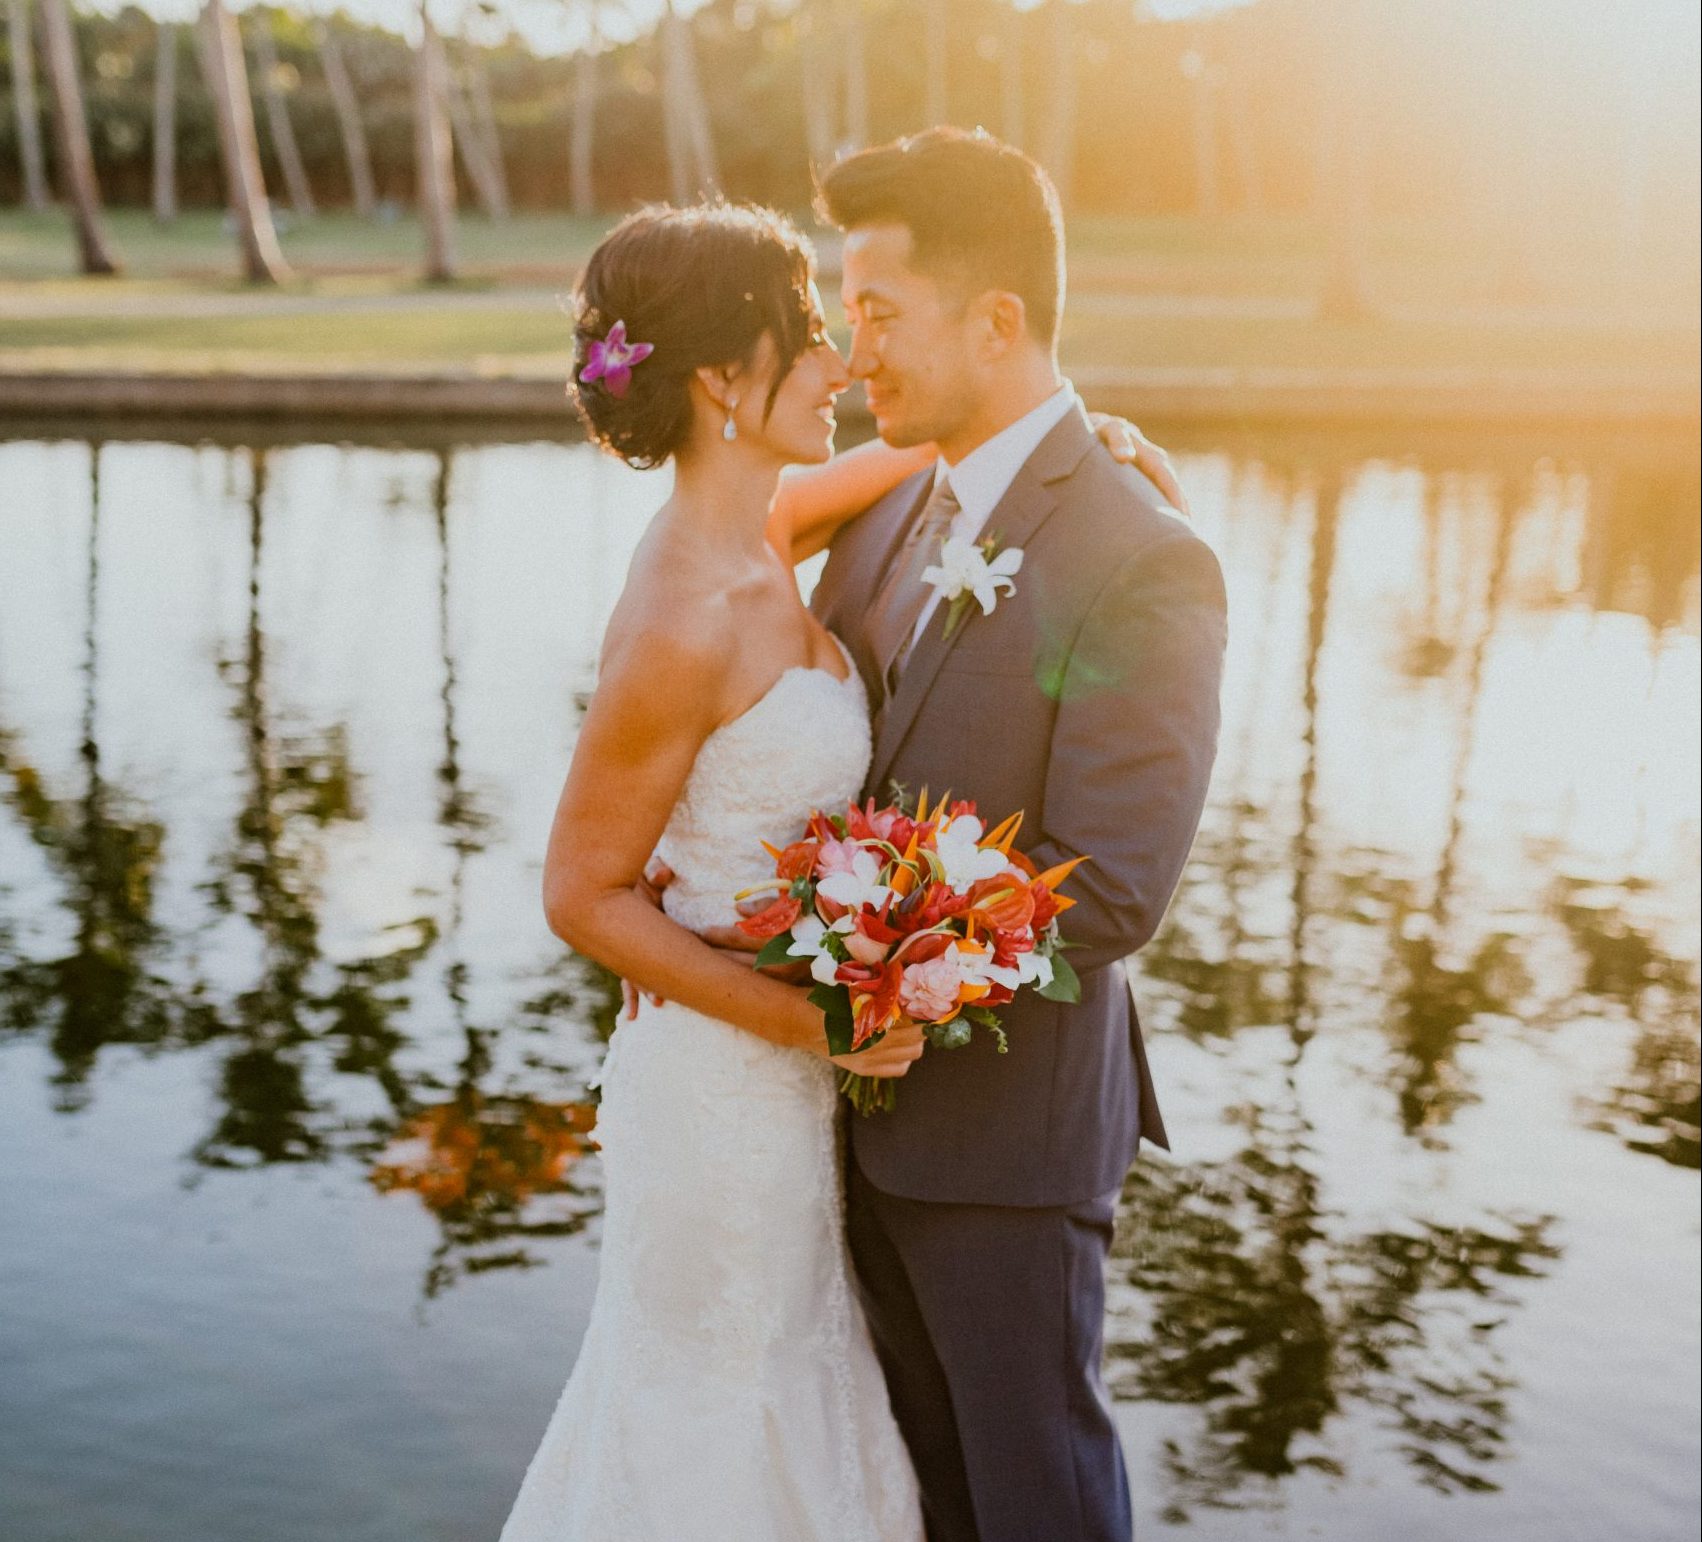 Bride and Groom kiss in front of reflection pool at sunset on Oahu Hawaii. Bride holds her wedding bouquet dressed in a strapless wedding dress with a train and wearing a updo bridal style | Oahu Wedding Photographer, Oahu Elopement Photographer, Destination Wedding Photographer, Destination Elopement Photographer, Newlywed moments ideas, Newlywed Photography inspiration, Hawaii Elopement ideas | chelseaabril.com